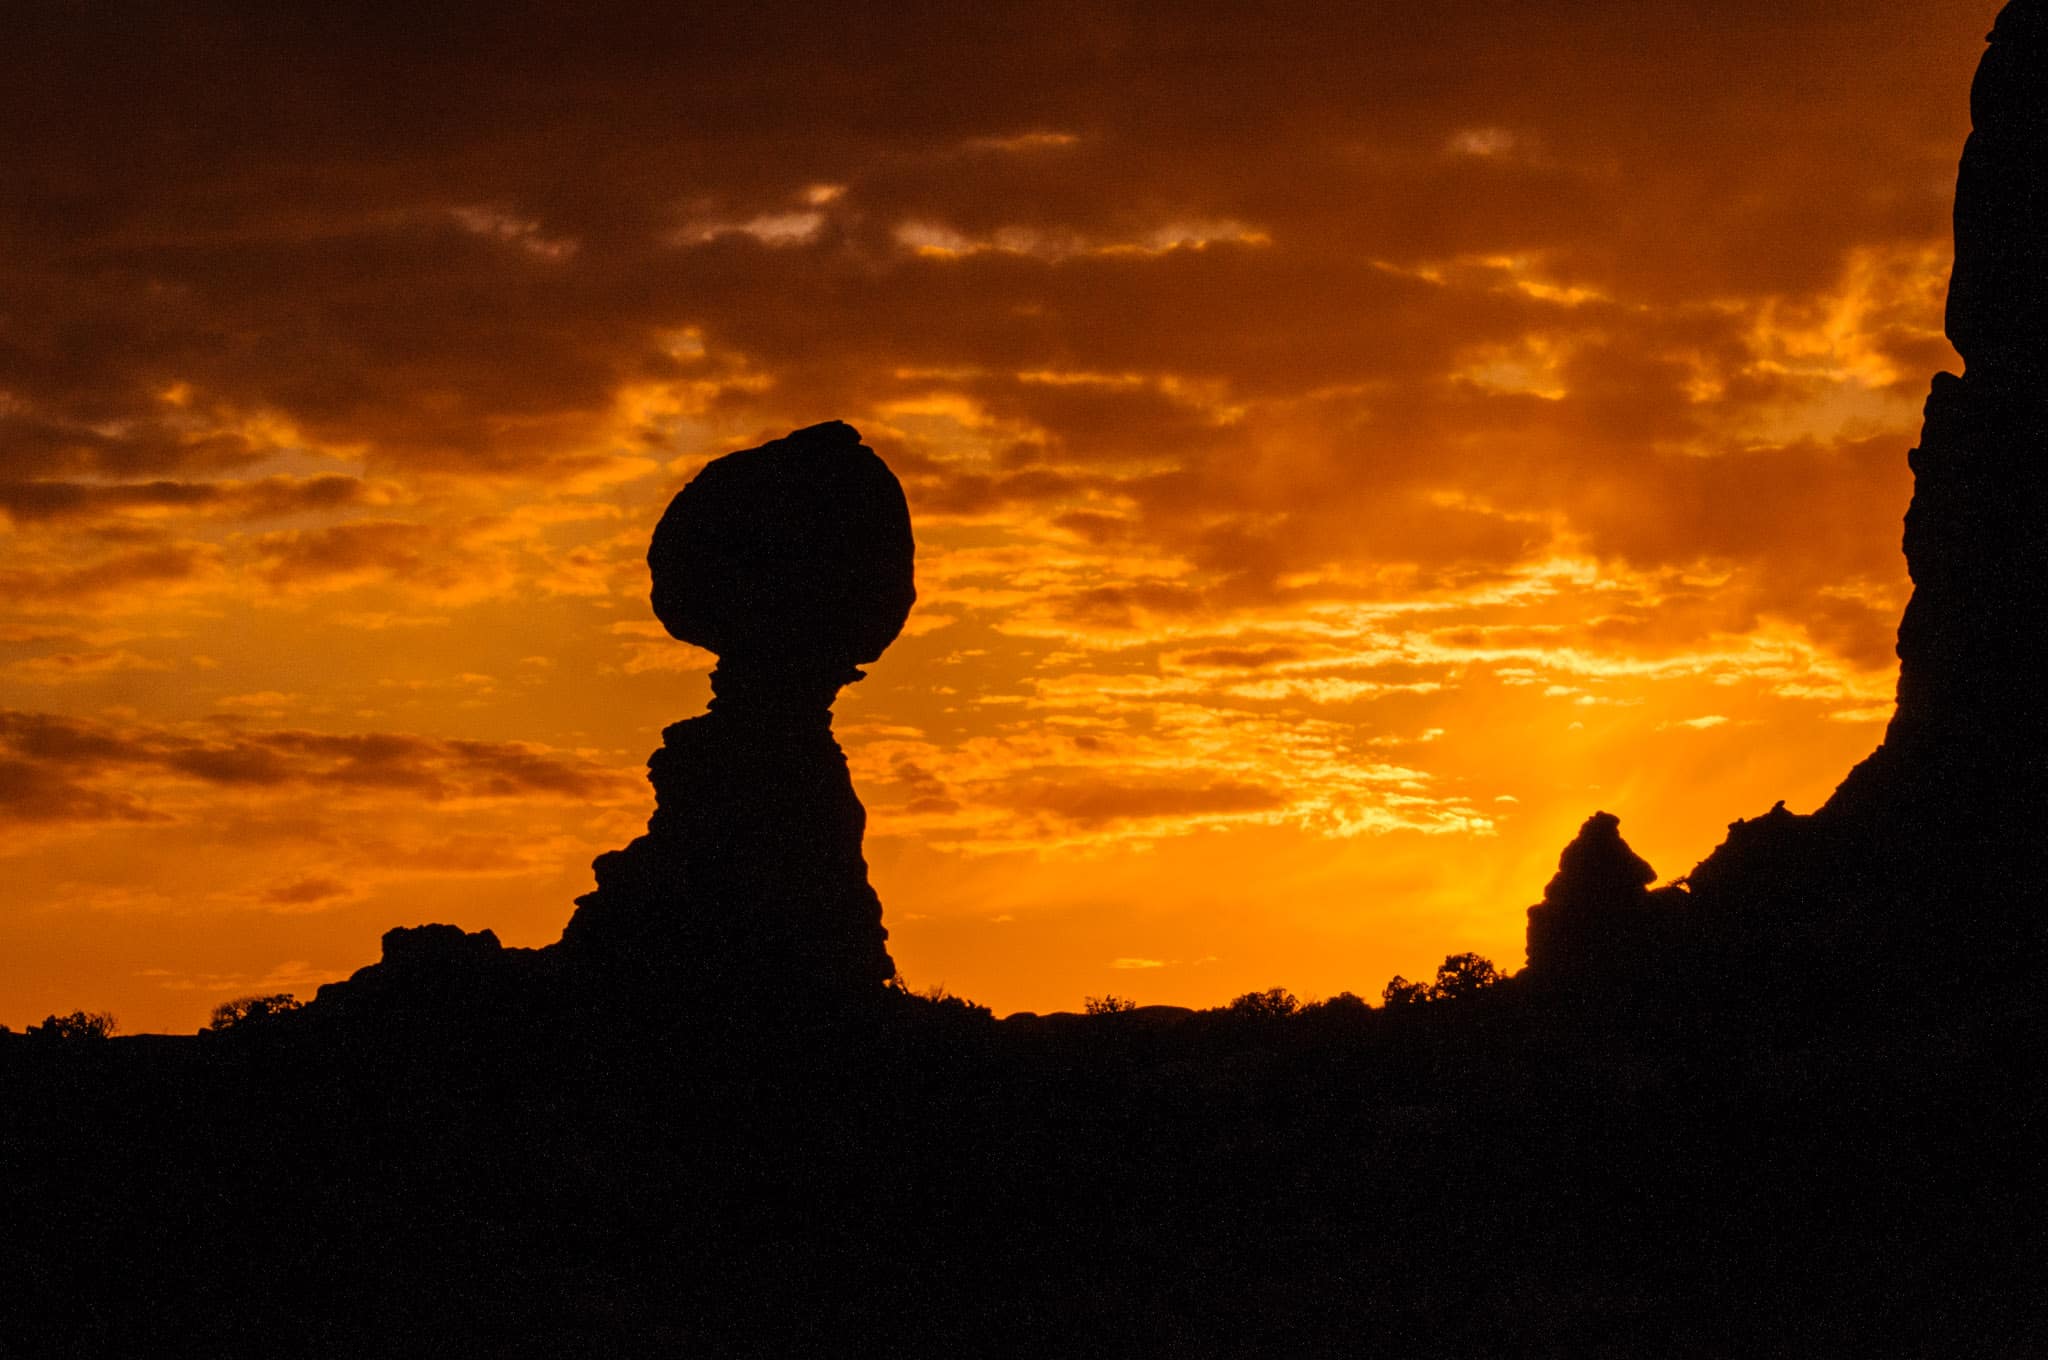 Balanced Rock at sunset in Arches National Park.